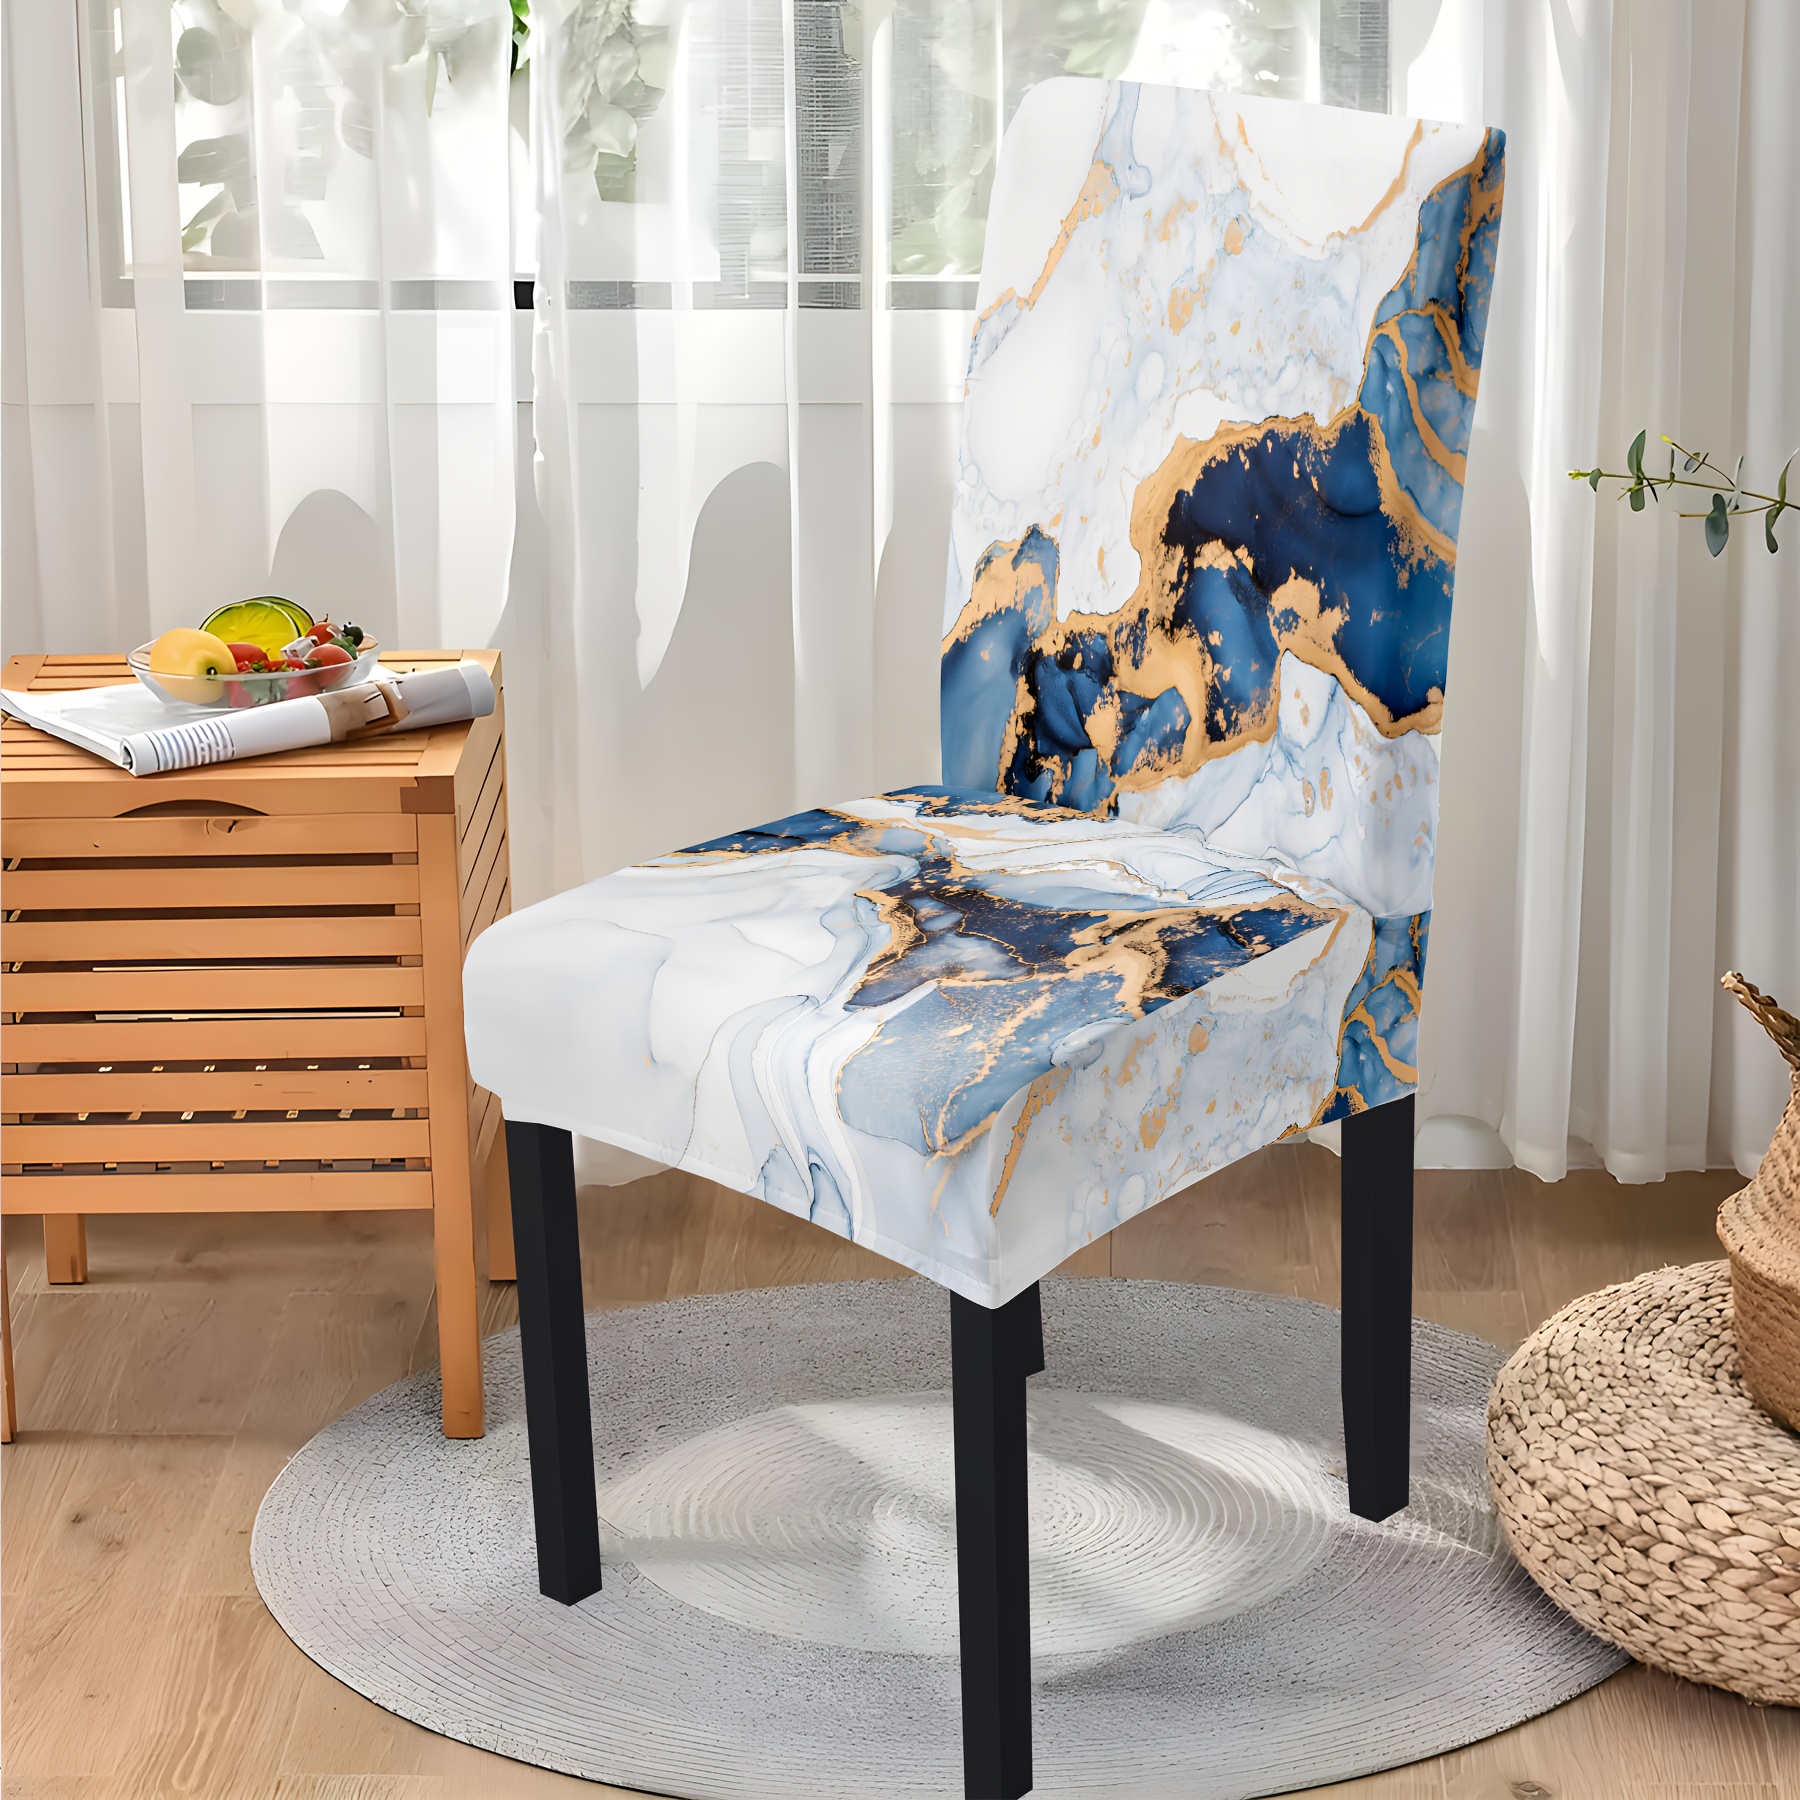 

2/4/6pcs Blue Marble Print Chair Covers, Stretchable Milk Silk Fabric, Washable & Colorfast, Dust-proof Decorative Art Style For Dining Room Chair, Hotel, Garden Decor